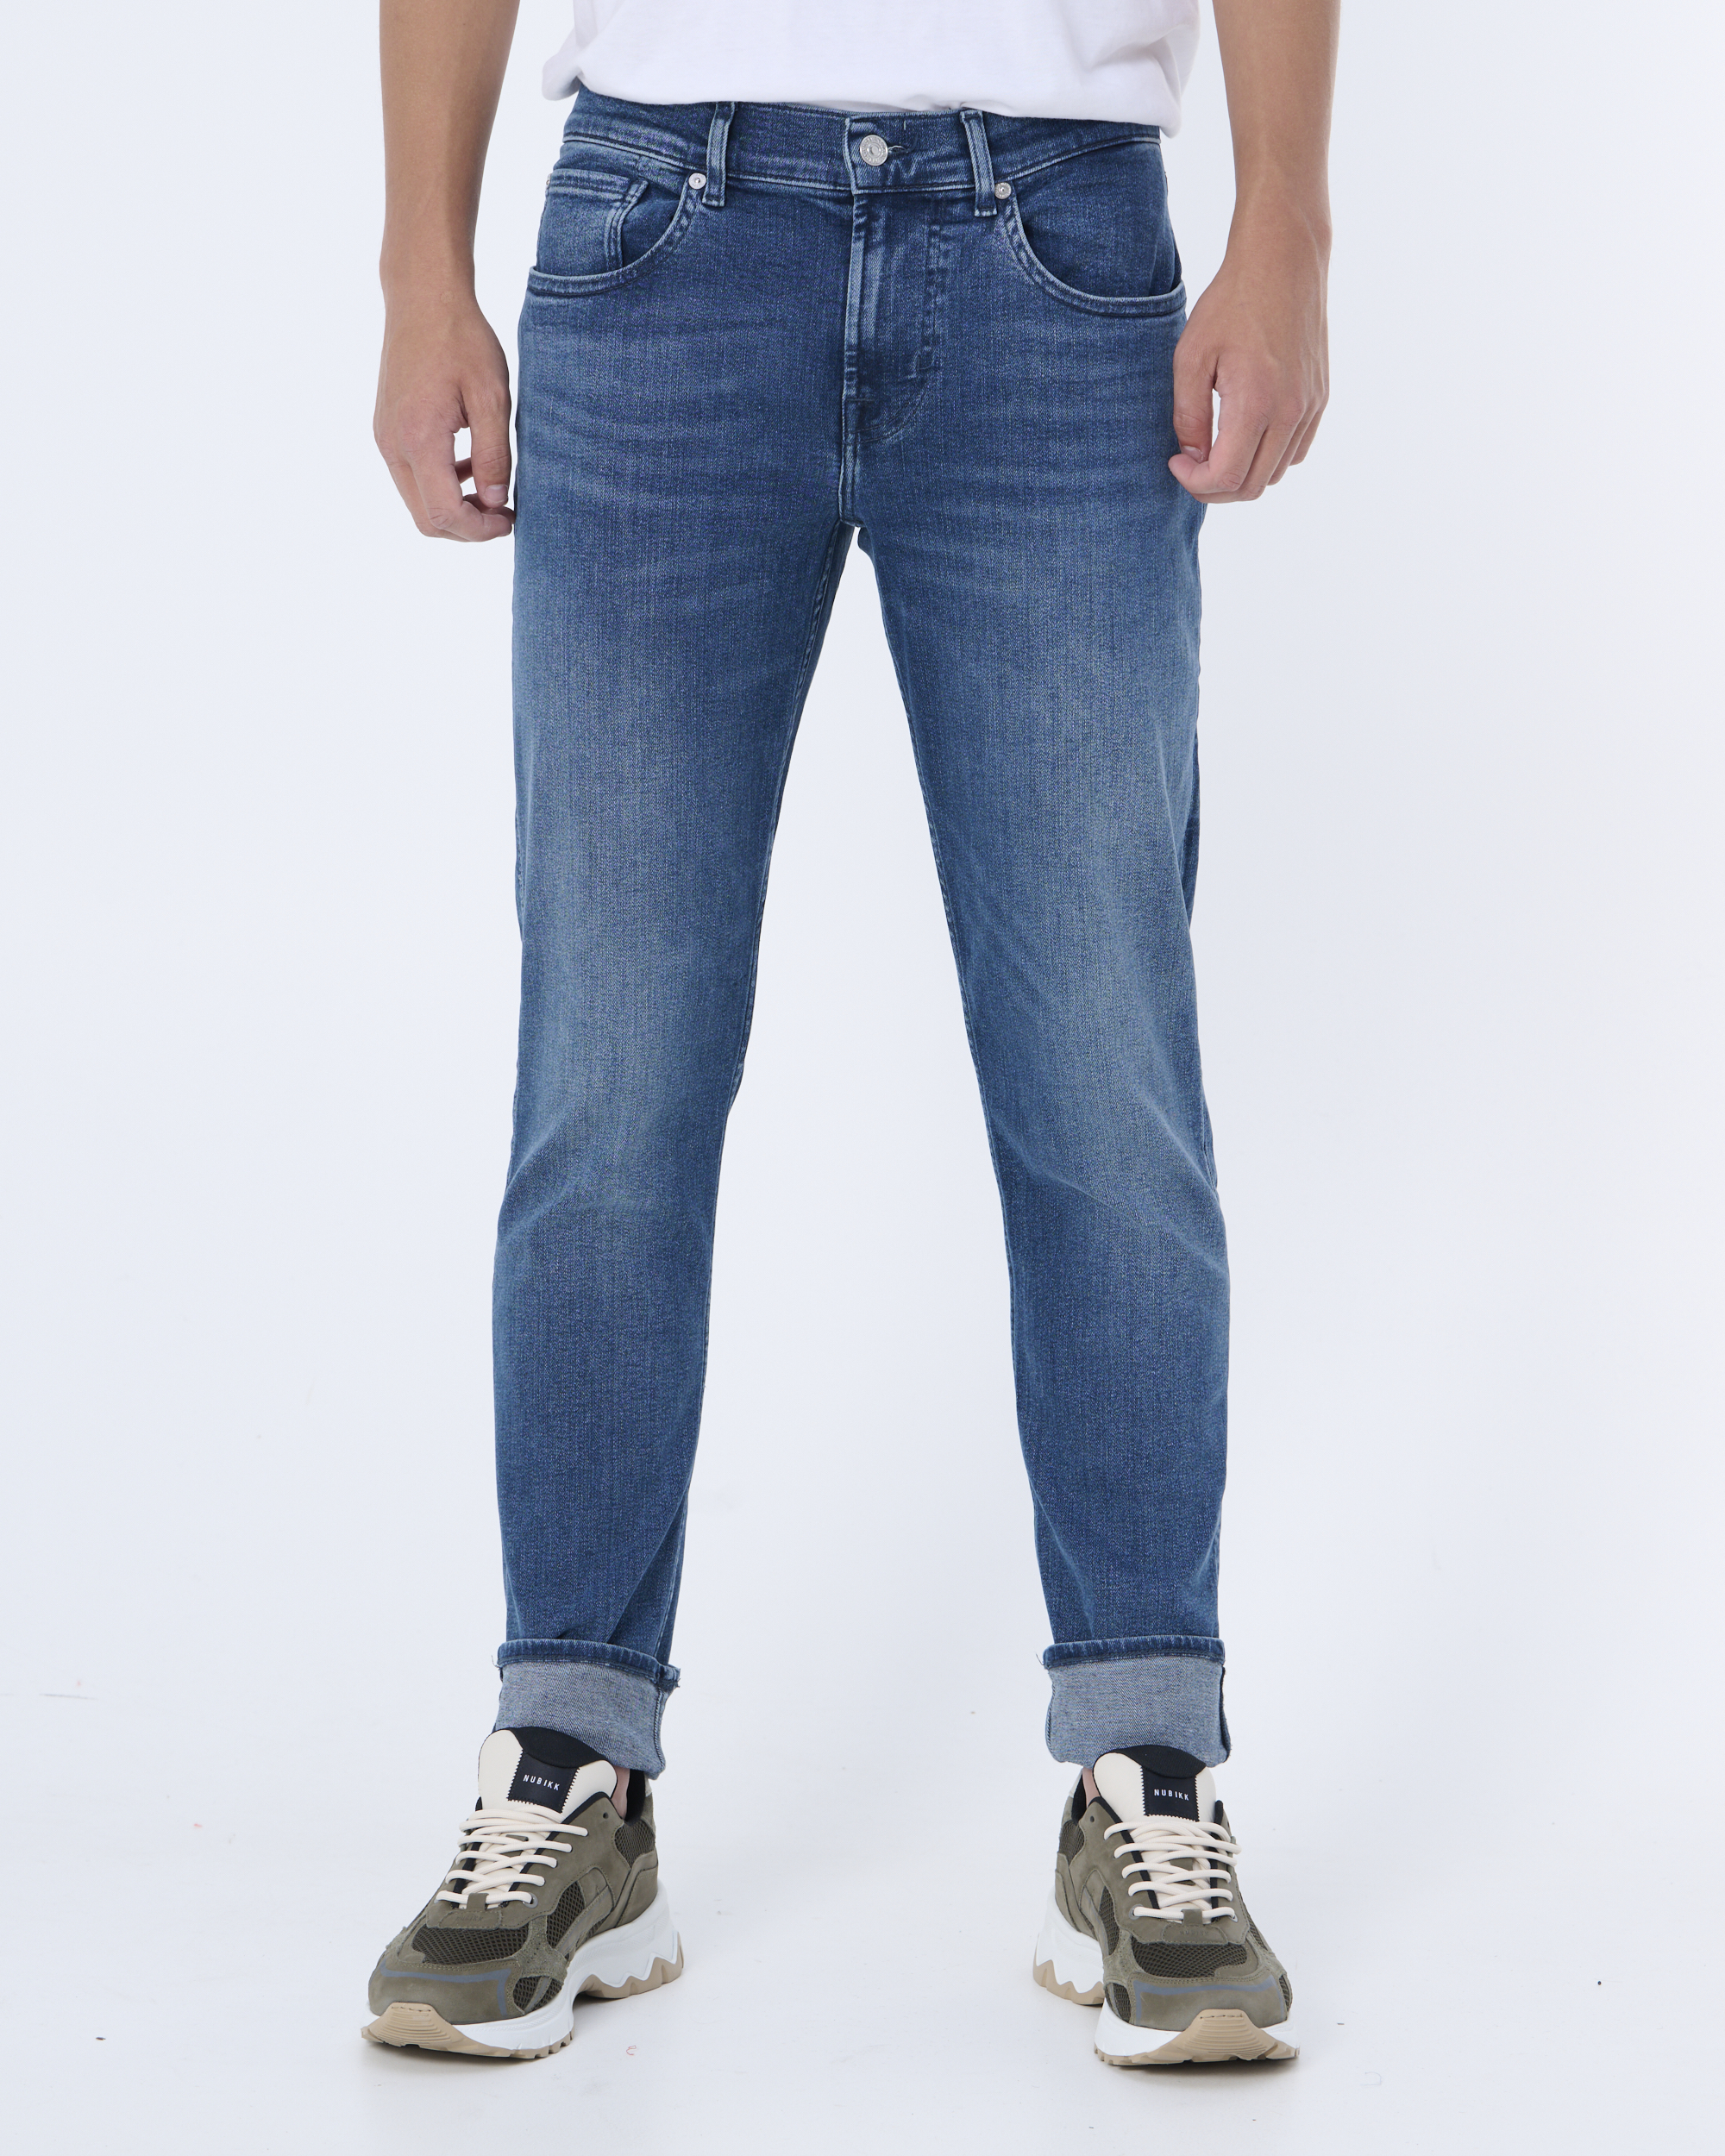 Afbeelding van 7 For All Mankind Maze jeans